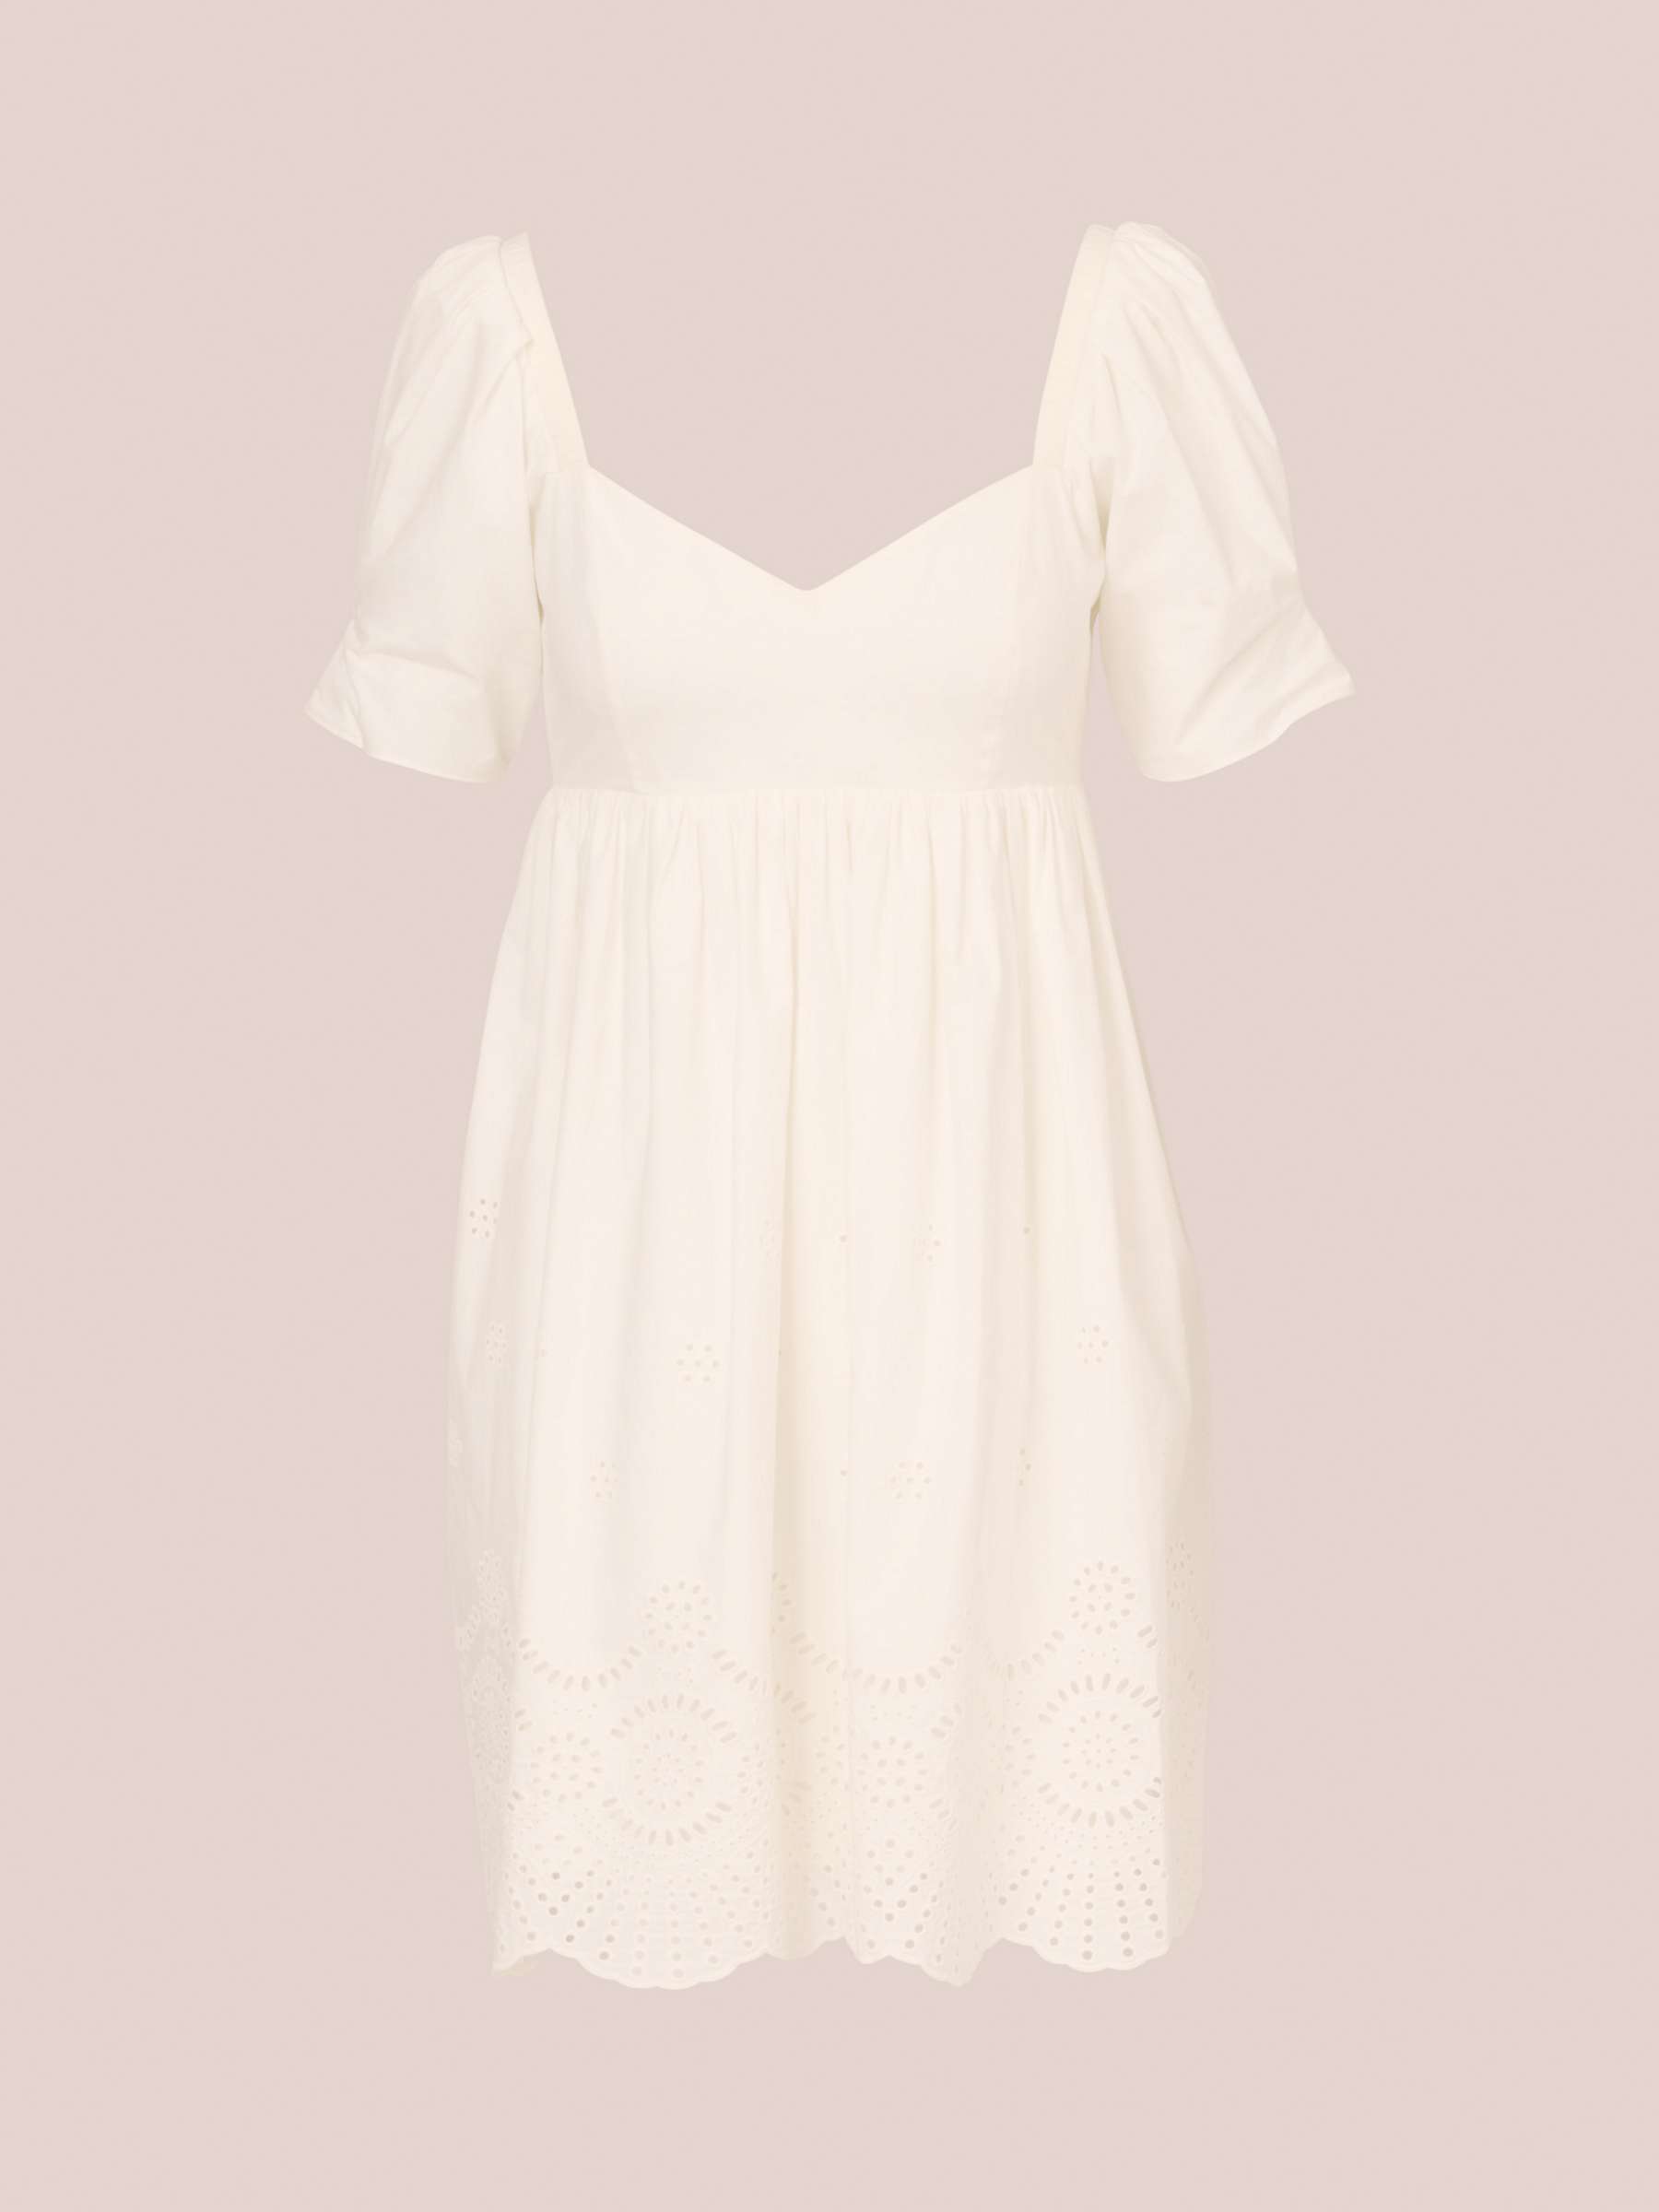 Buy Adrianna By Adrianna Papell Eyelet Cotton Mini Dress, Ivory Online at johnlewis.com